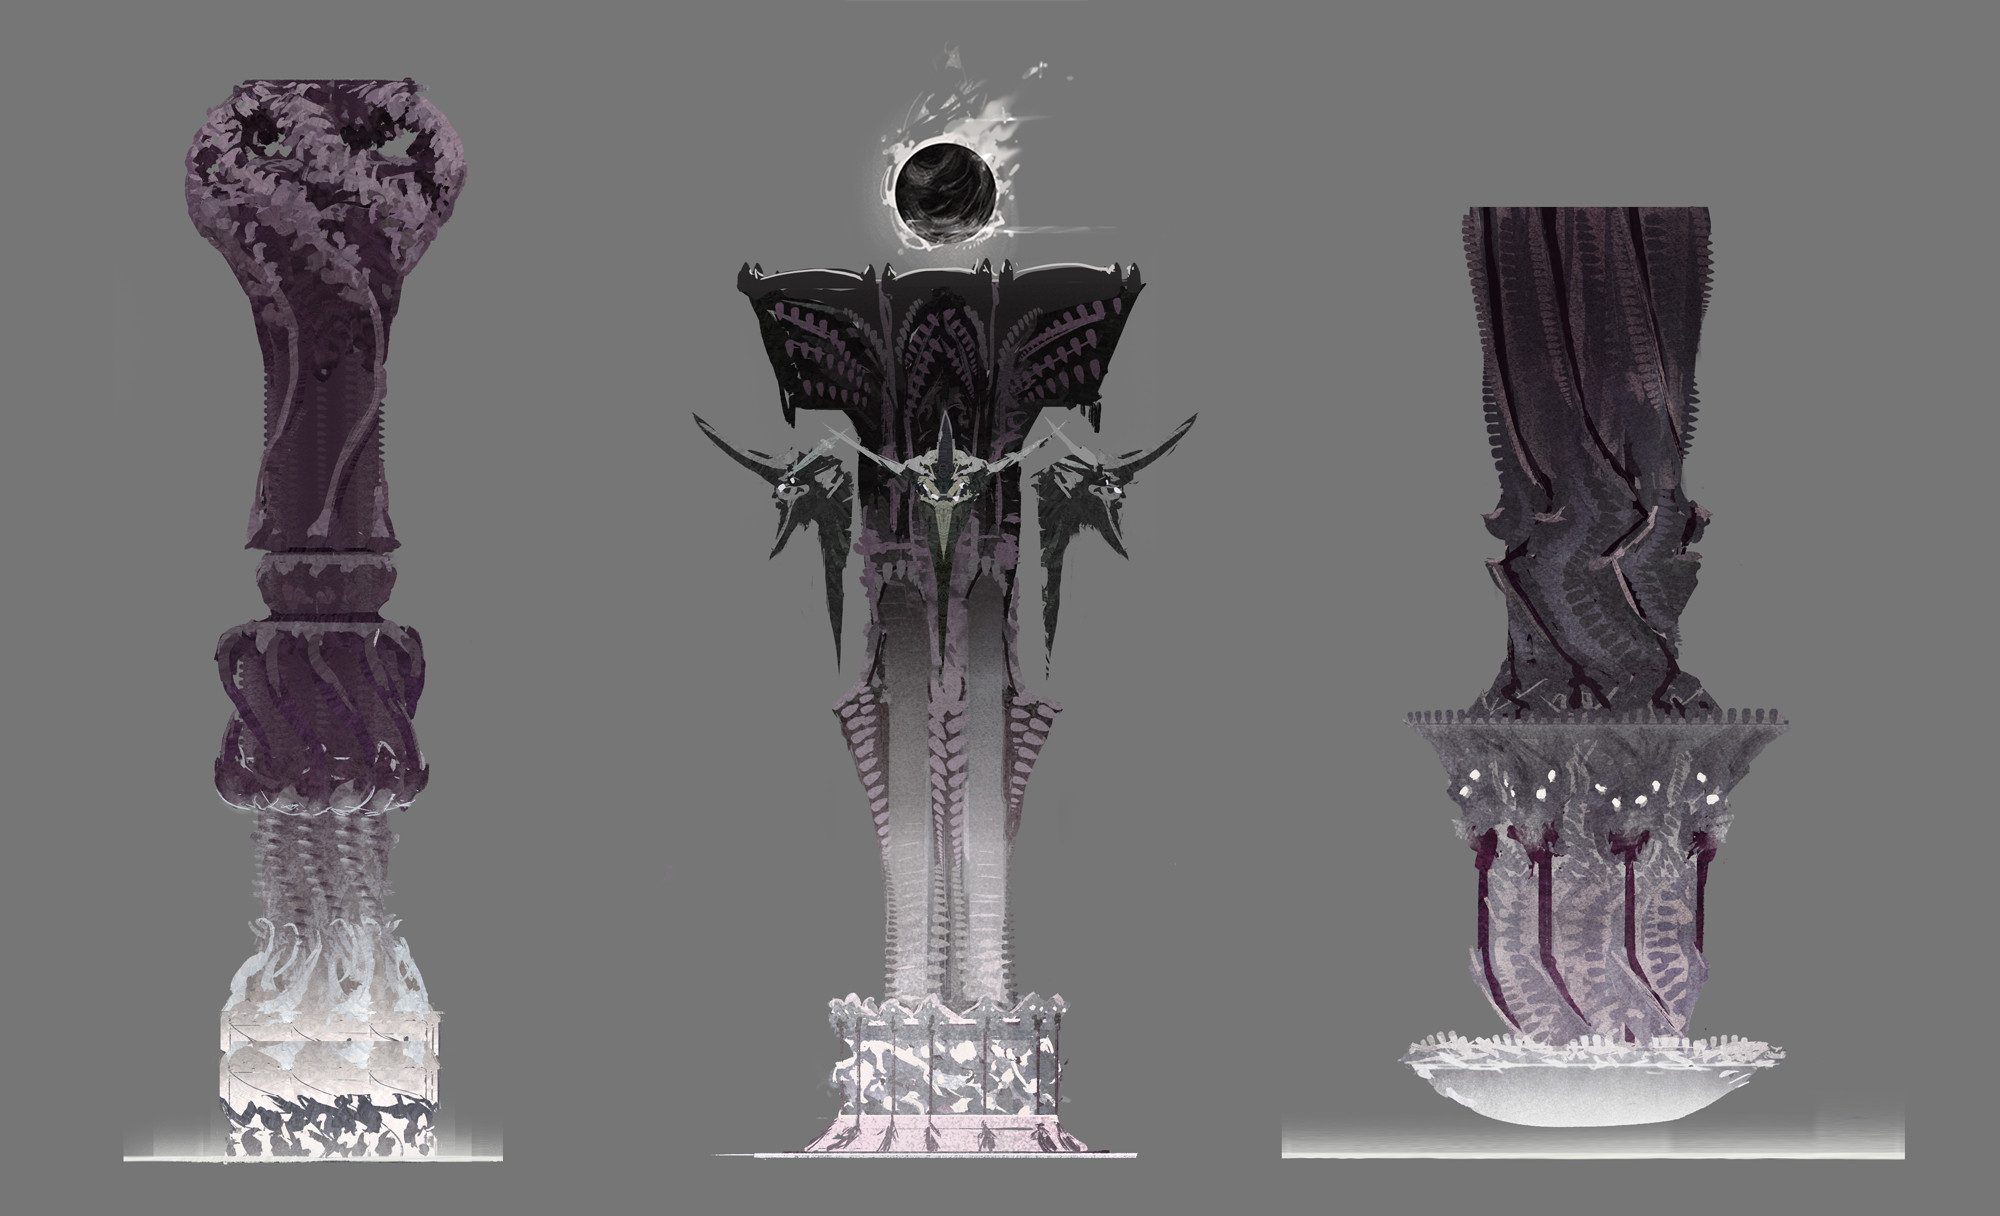 More concepts for columns in the alien cathedral.